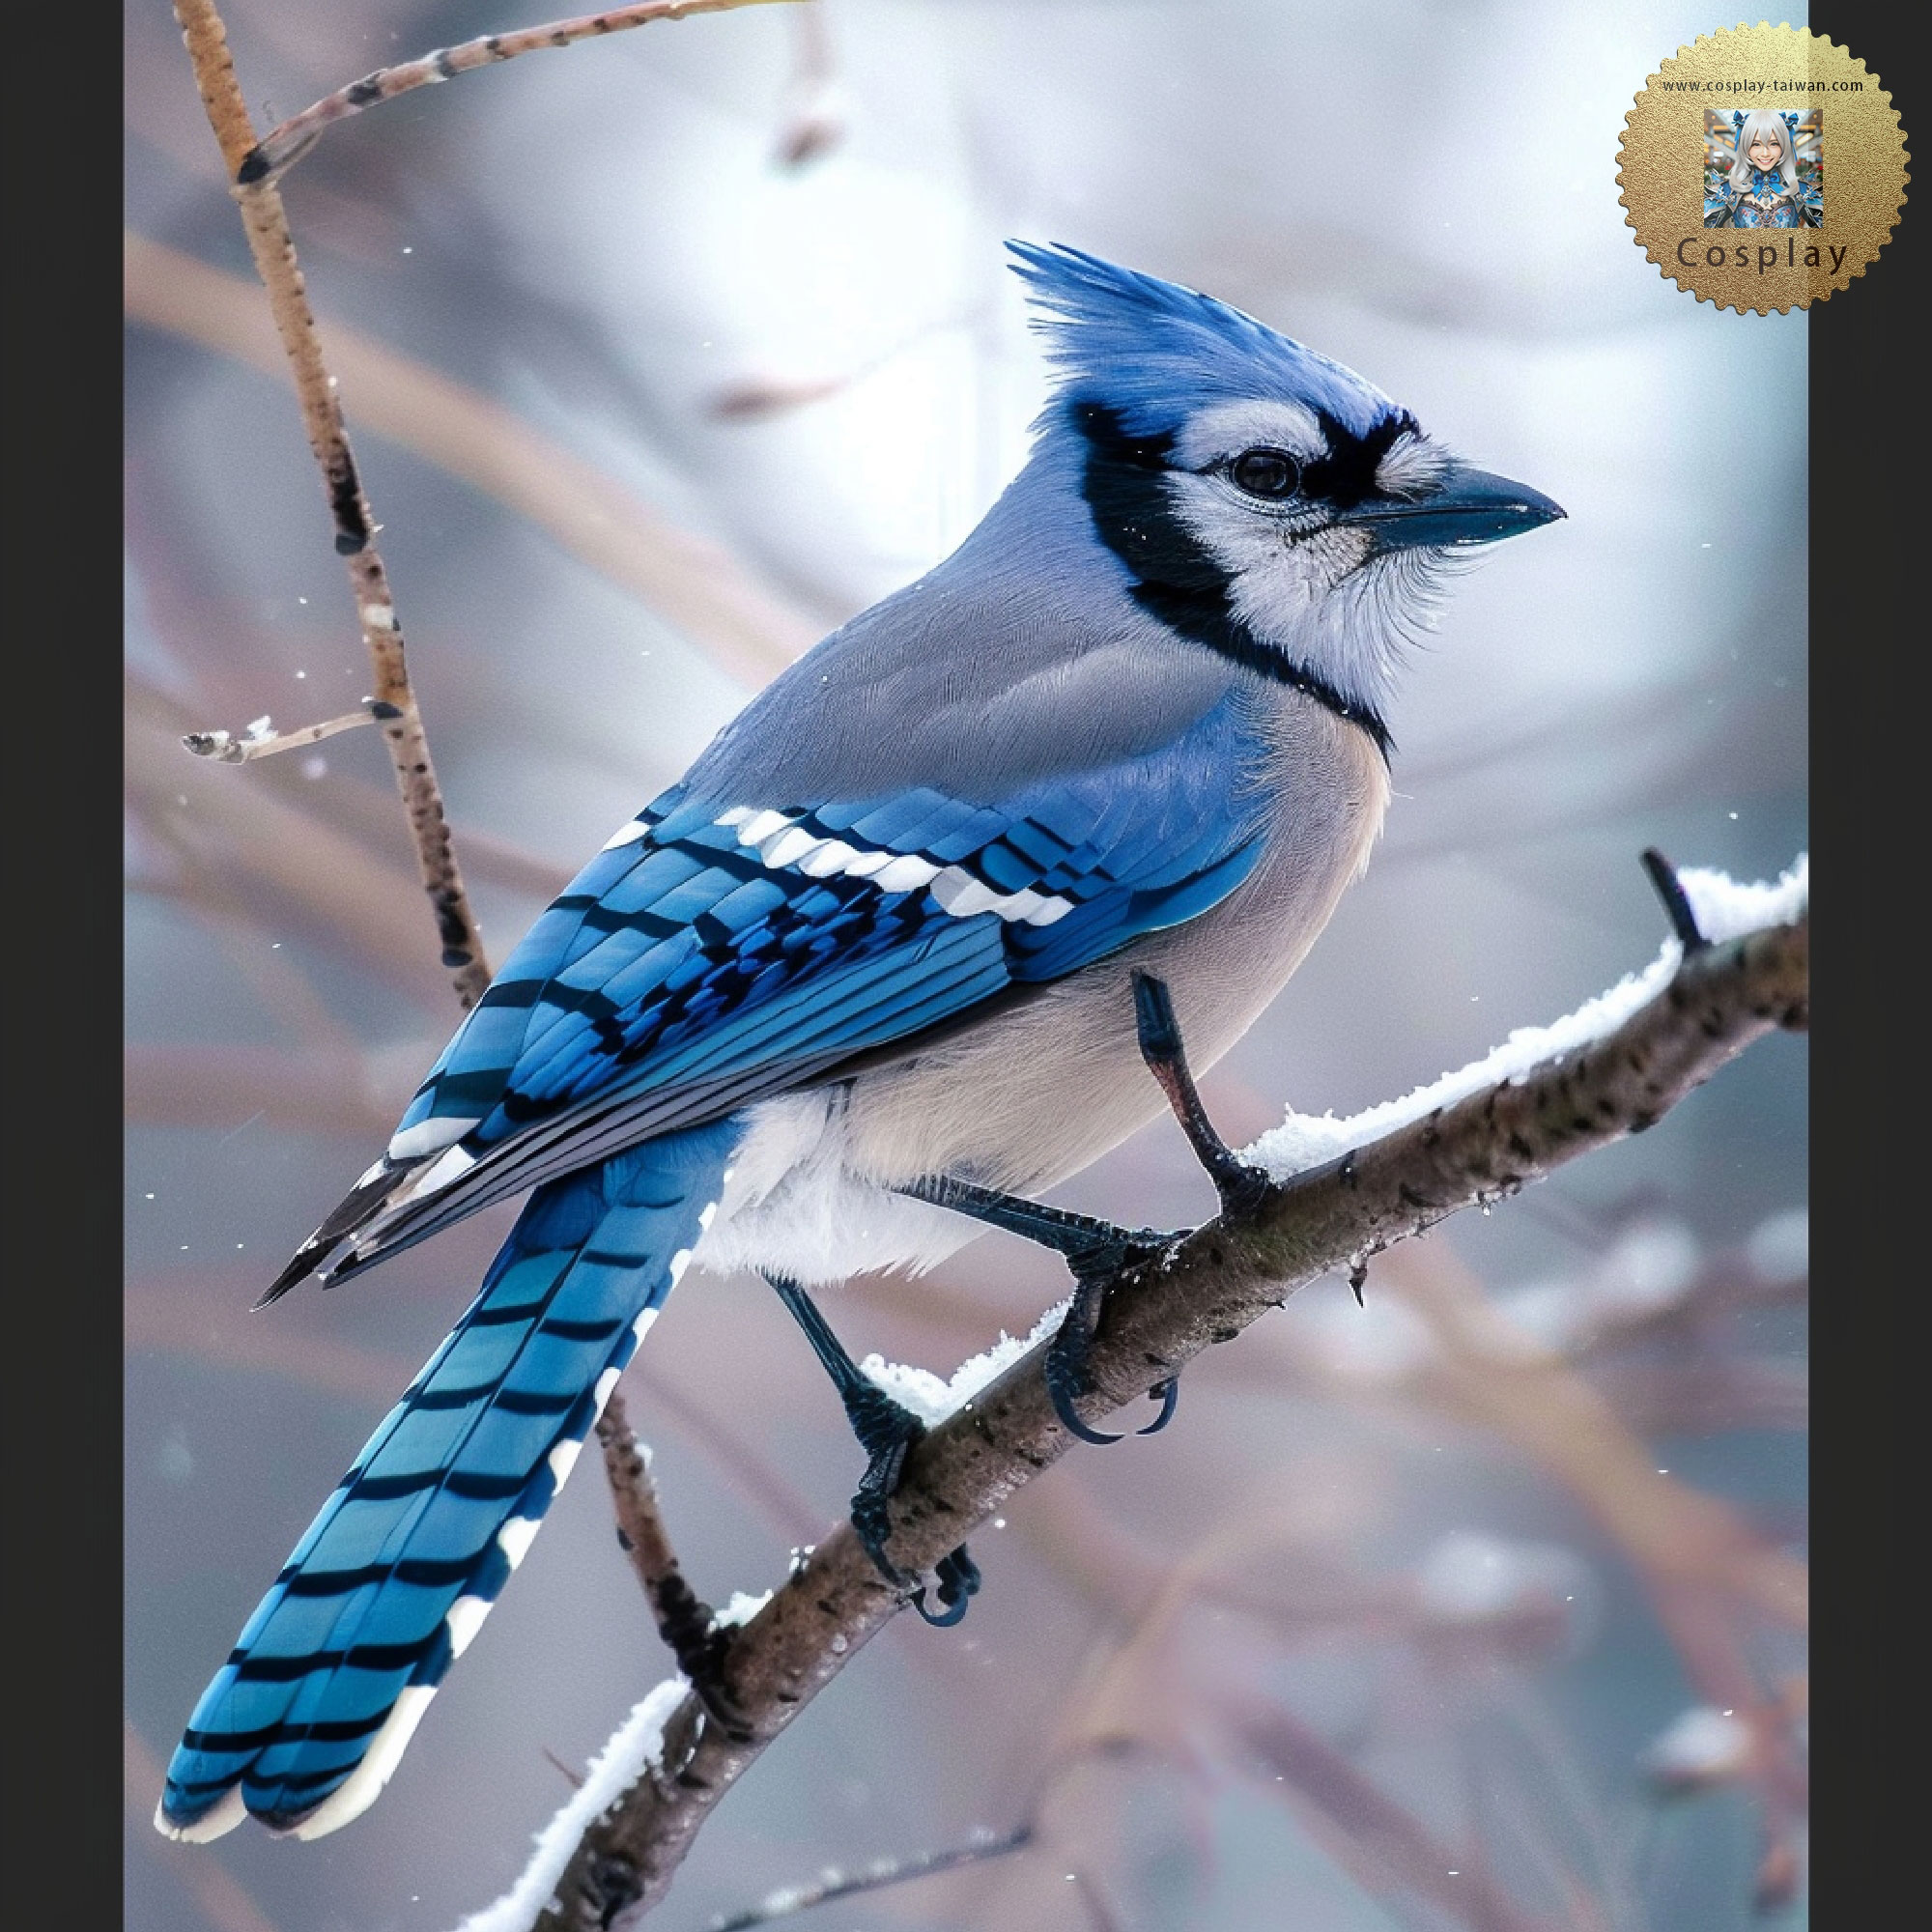 leonchou1968_A_vivid_portrait_of_a_Blue_Jay_in_the_midst_of_a_g_57fbe0d1-f596-4665-90b6-9d99bf1a41eb.jpg